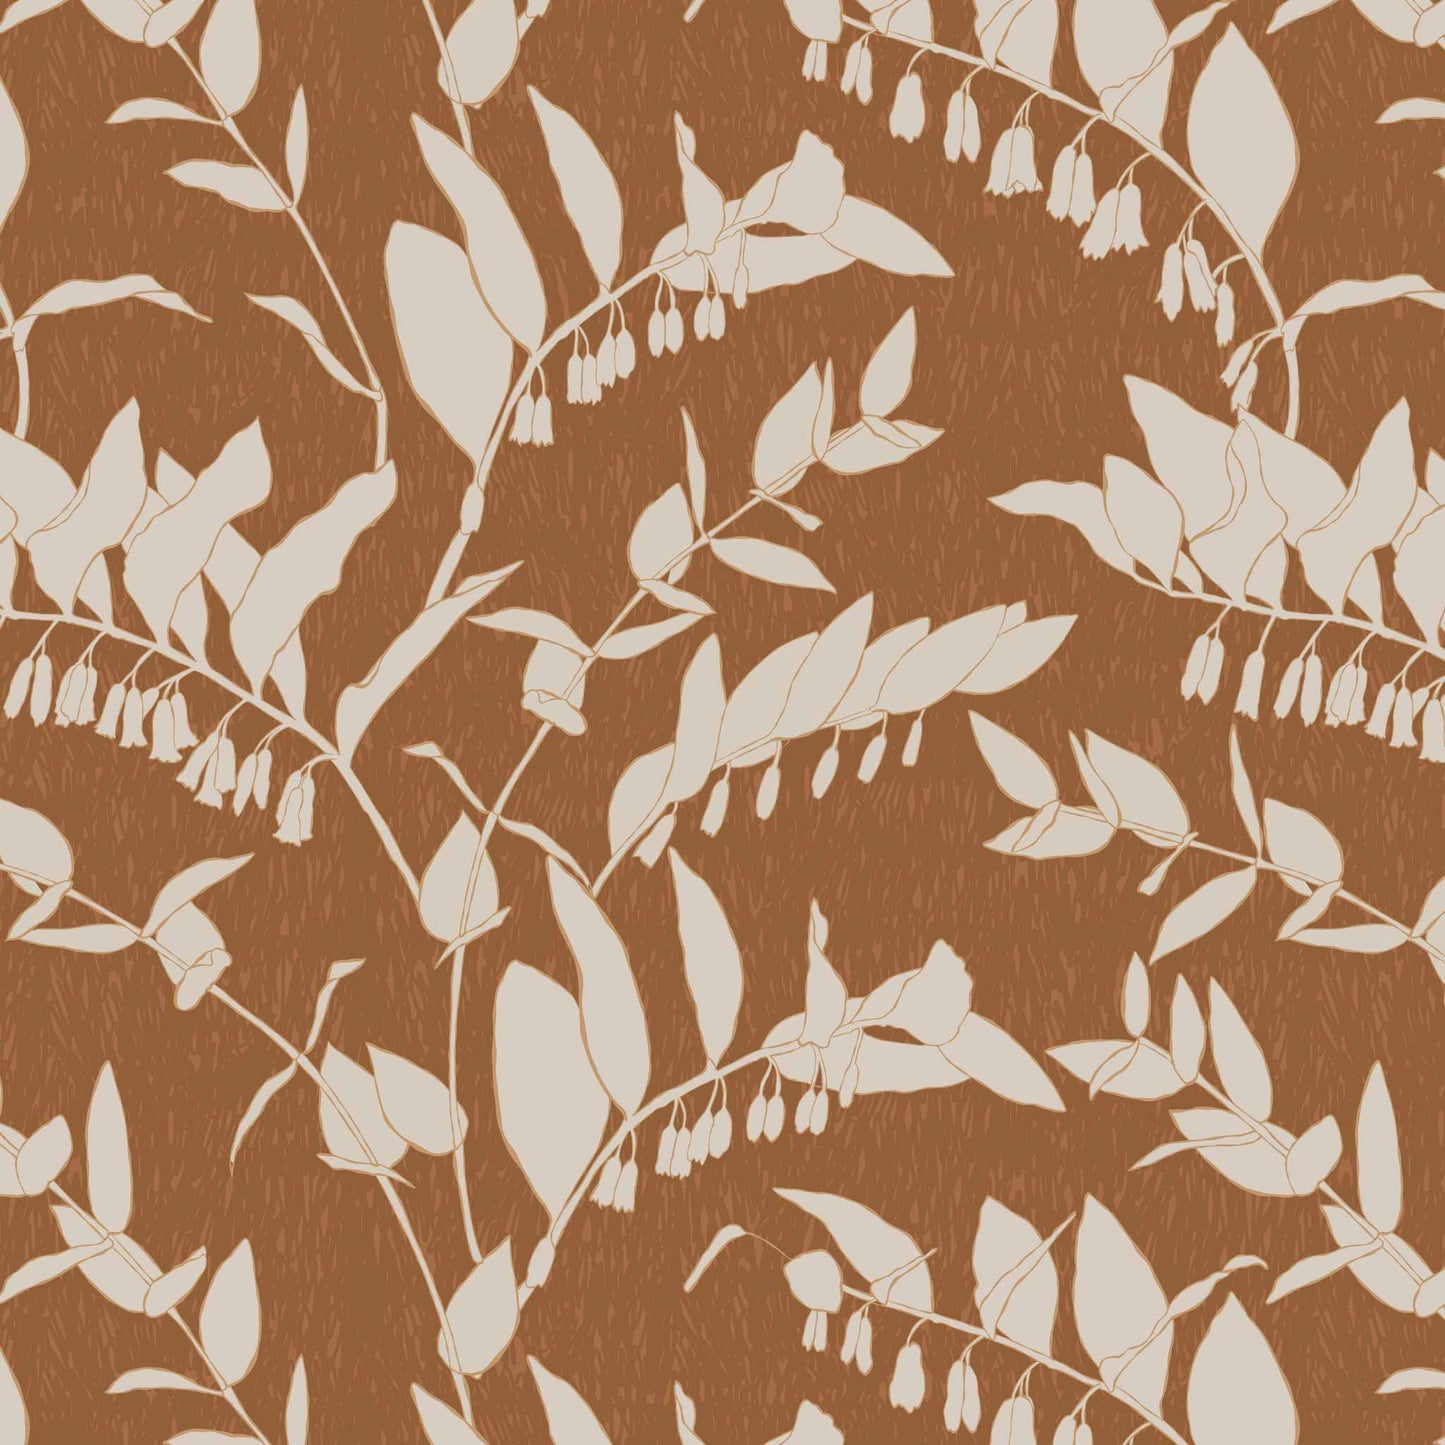 Vines Wallpaper in Rust adds an appreciation of understated chicness to any interior, offering a funky and moody essence to any space it graces.